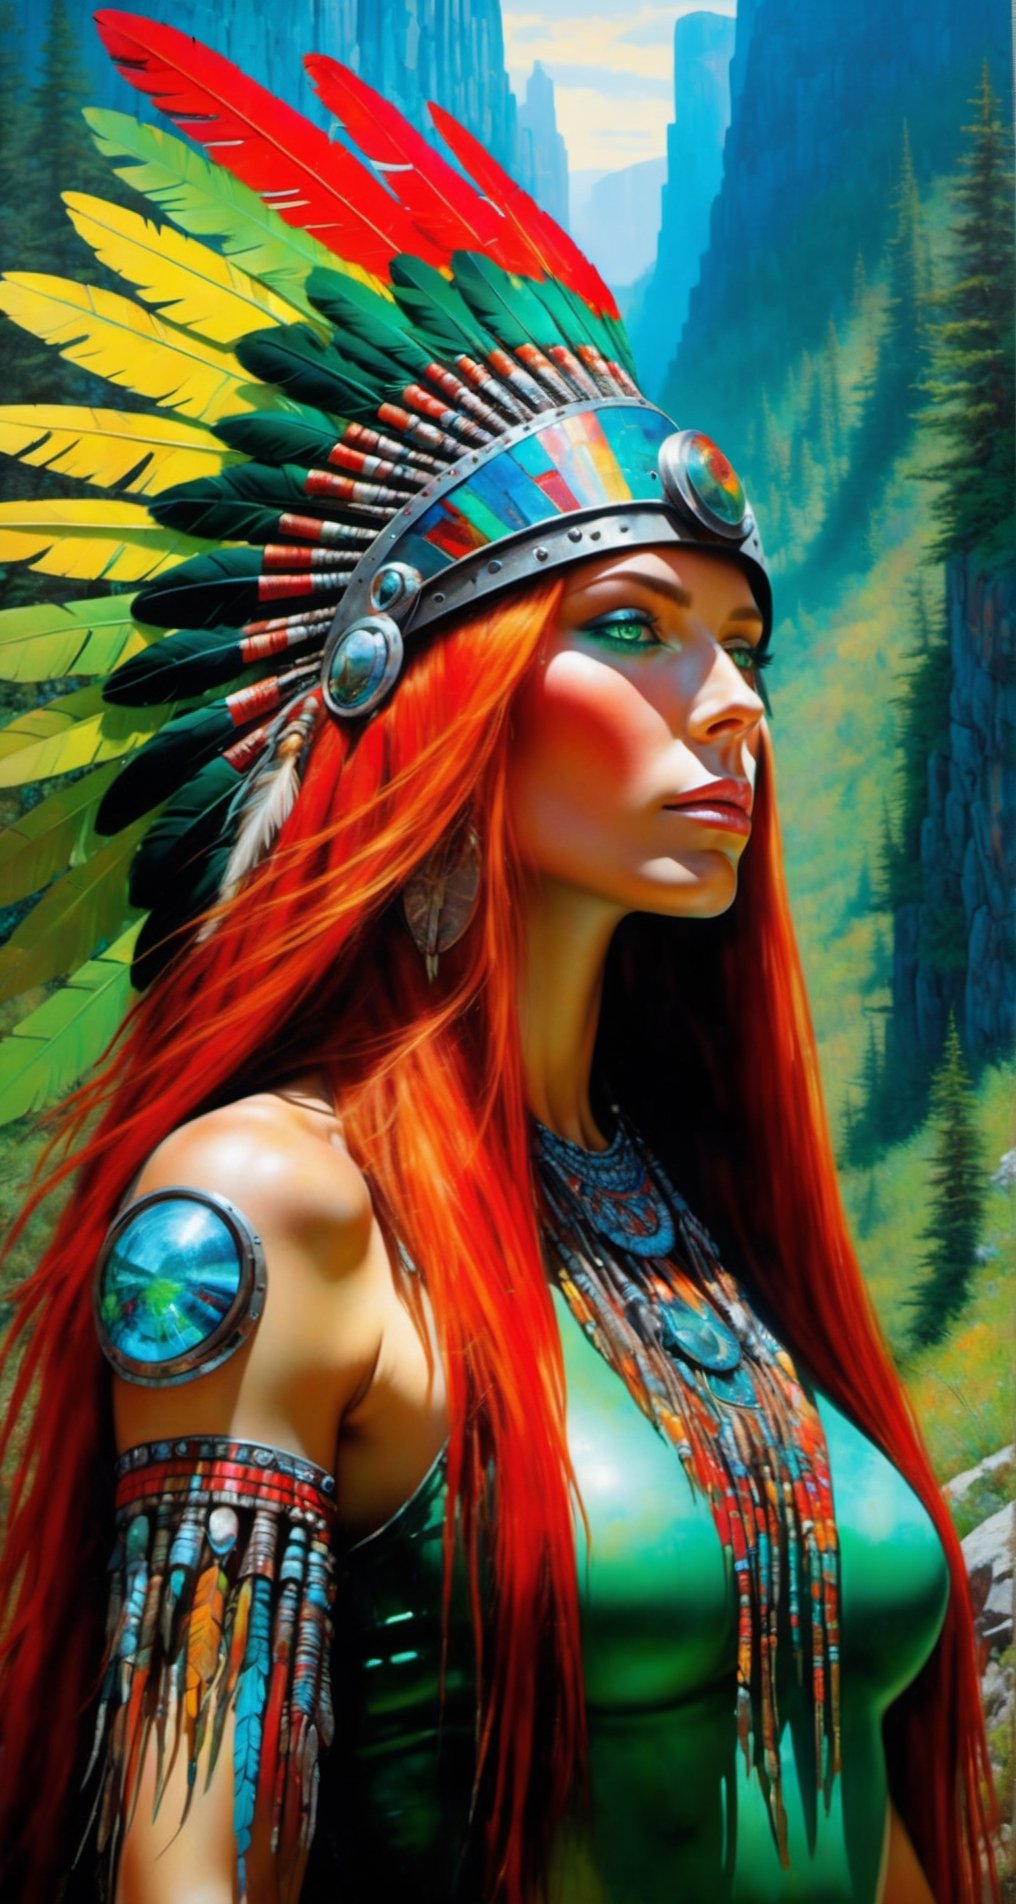 Please create a masterpiece,  stunning beauty,  perfect face,  Long red hair, green_eyes, epic love,  Slave to the machine,  full-body,  Standing_on_rocks, overlooking valley below, hyper-realistic oil painting,  vibrant colors,  native american war bonnet,  biopunk,  cyborg by Peter Gric,  Hans Ruedi Giger,  Marco Mazzoni,  dystopic,  golden light,  perfect composition,  multiple colours dripping paint,  